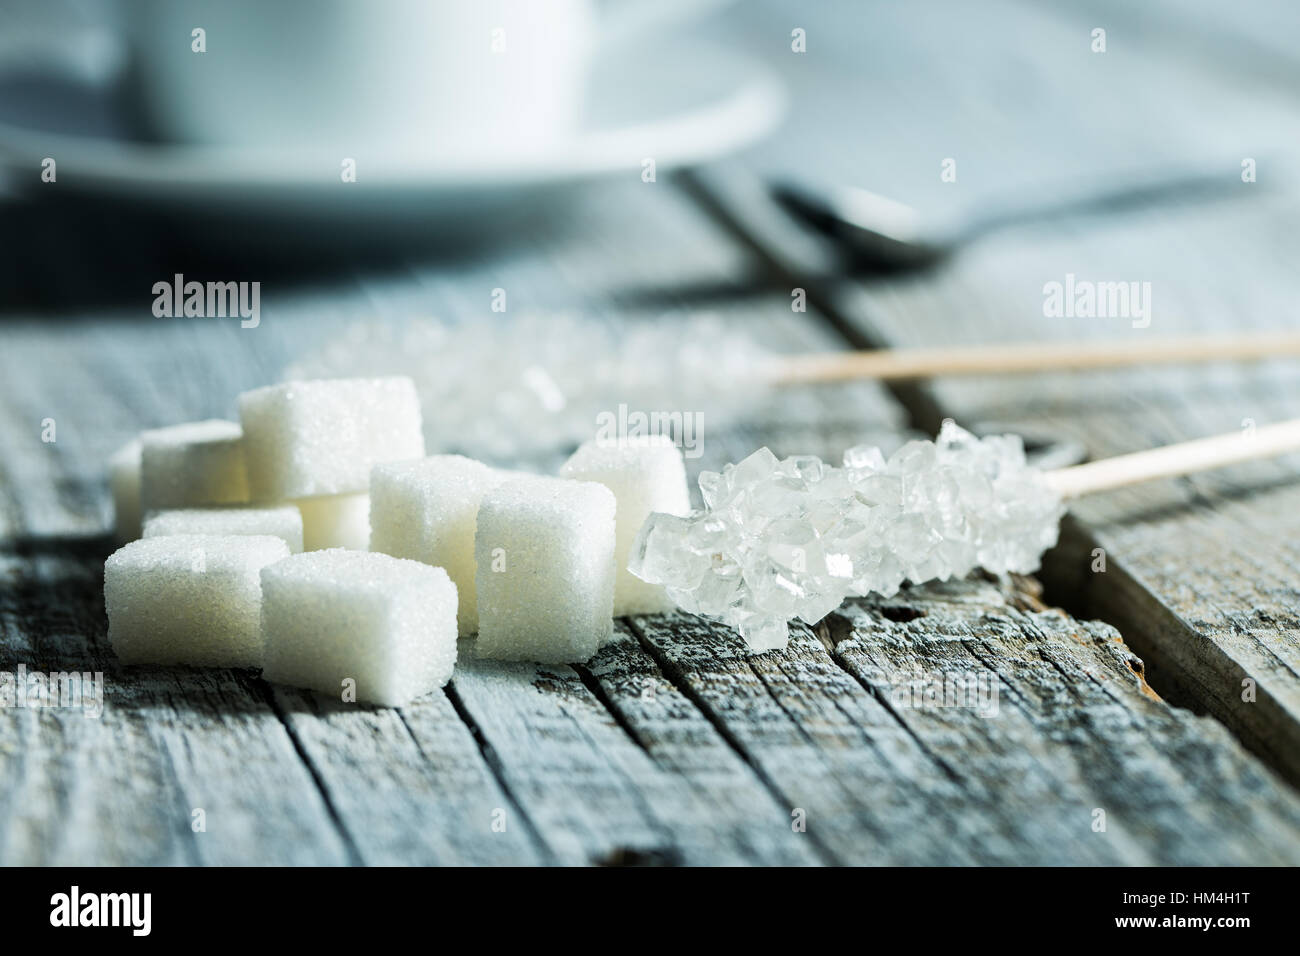 Crystallized sugar on wooden stick and sugar cubes on wooden table. Stock Photo